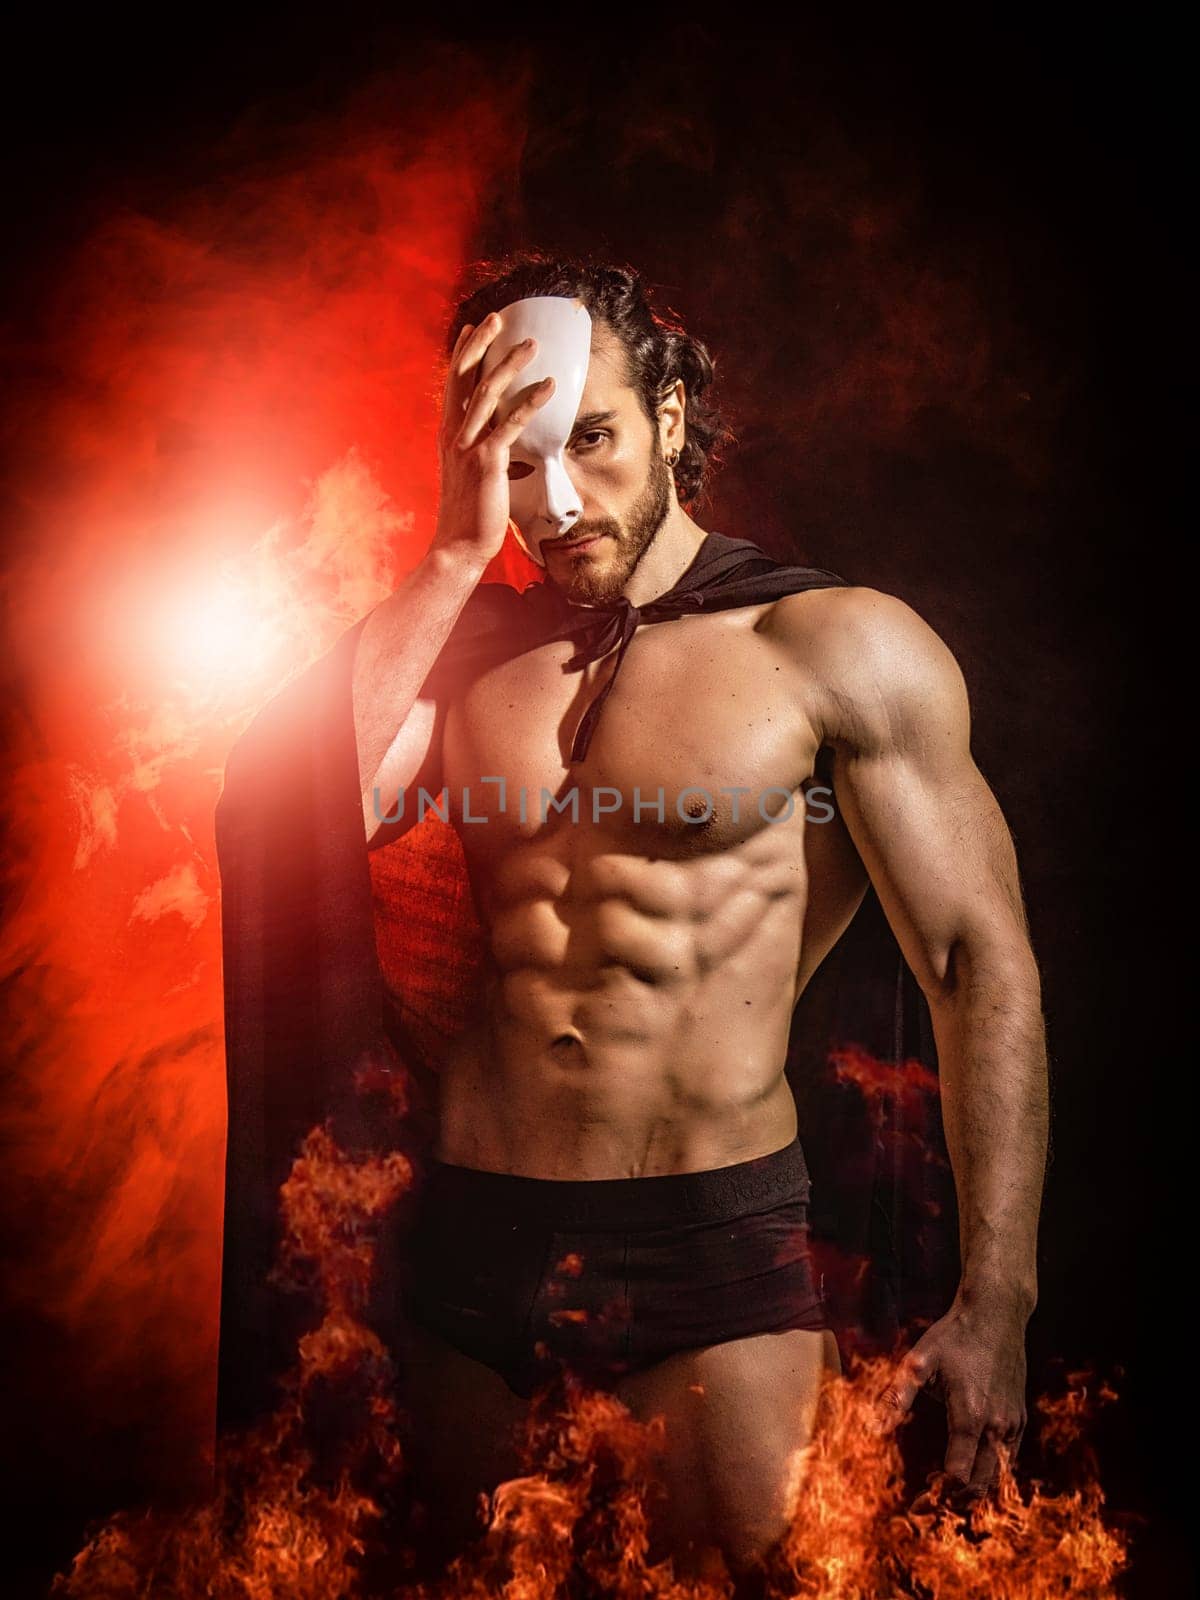 Shirtless muscular male with naked torso in cloak and underpants standing in darkness, among fire and covering part of face with white mask